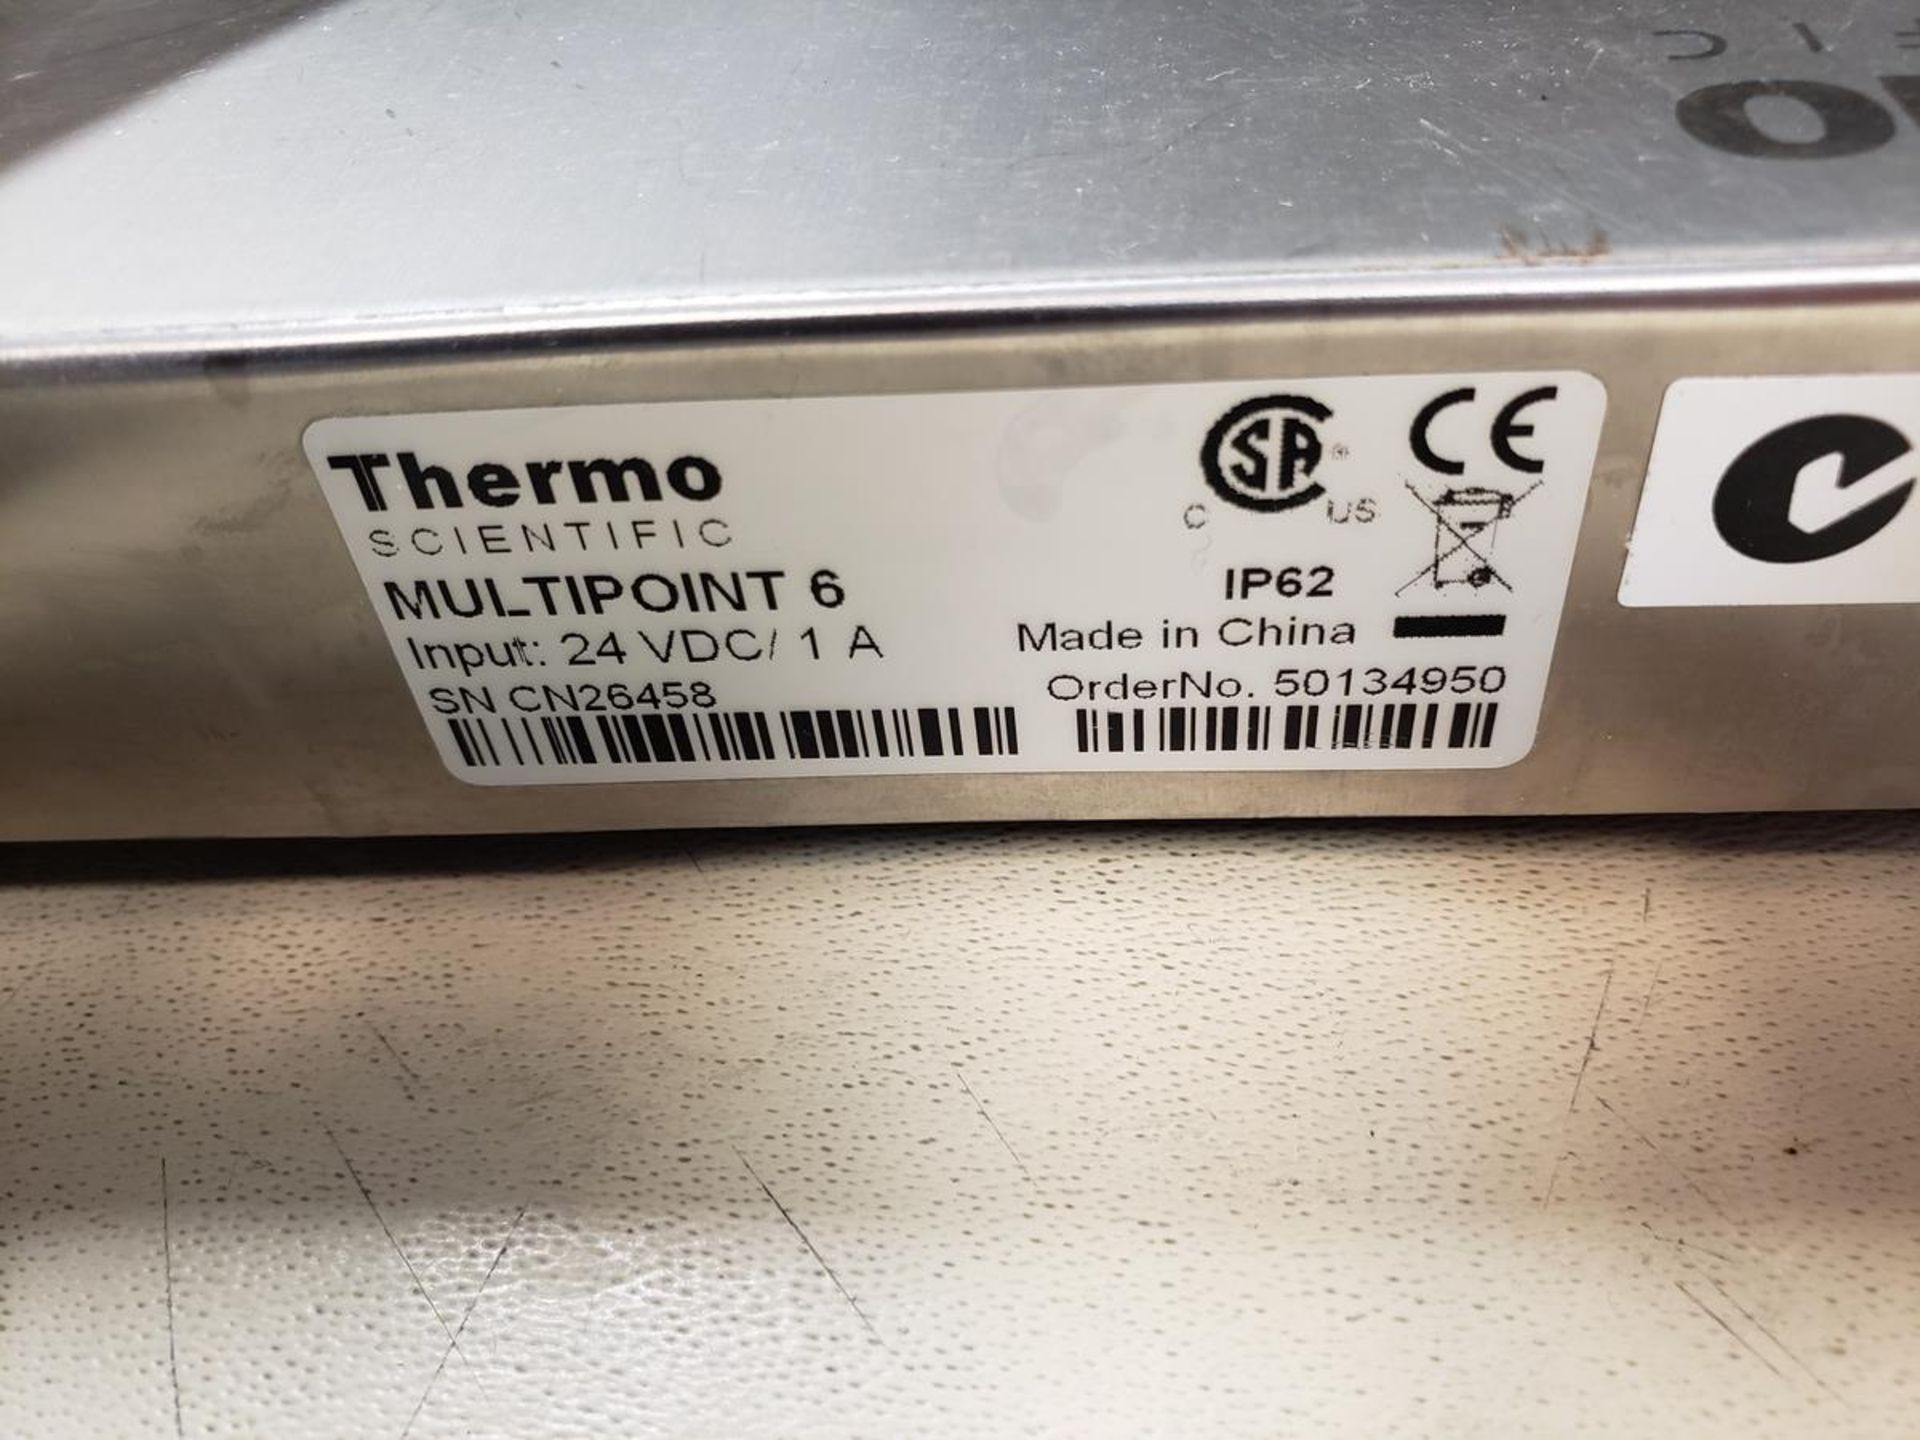 Thermo Scientific Multipoint 6 Stirrer, S/N CN26458 | Rig Fee $15 - Image 2 of 2